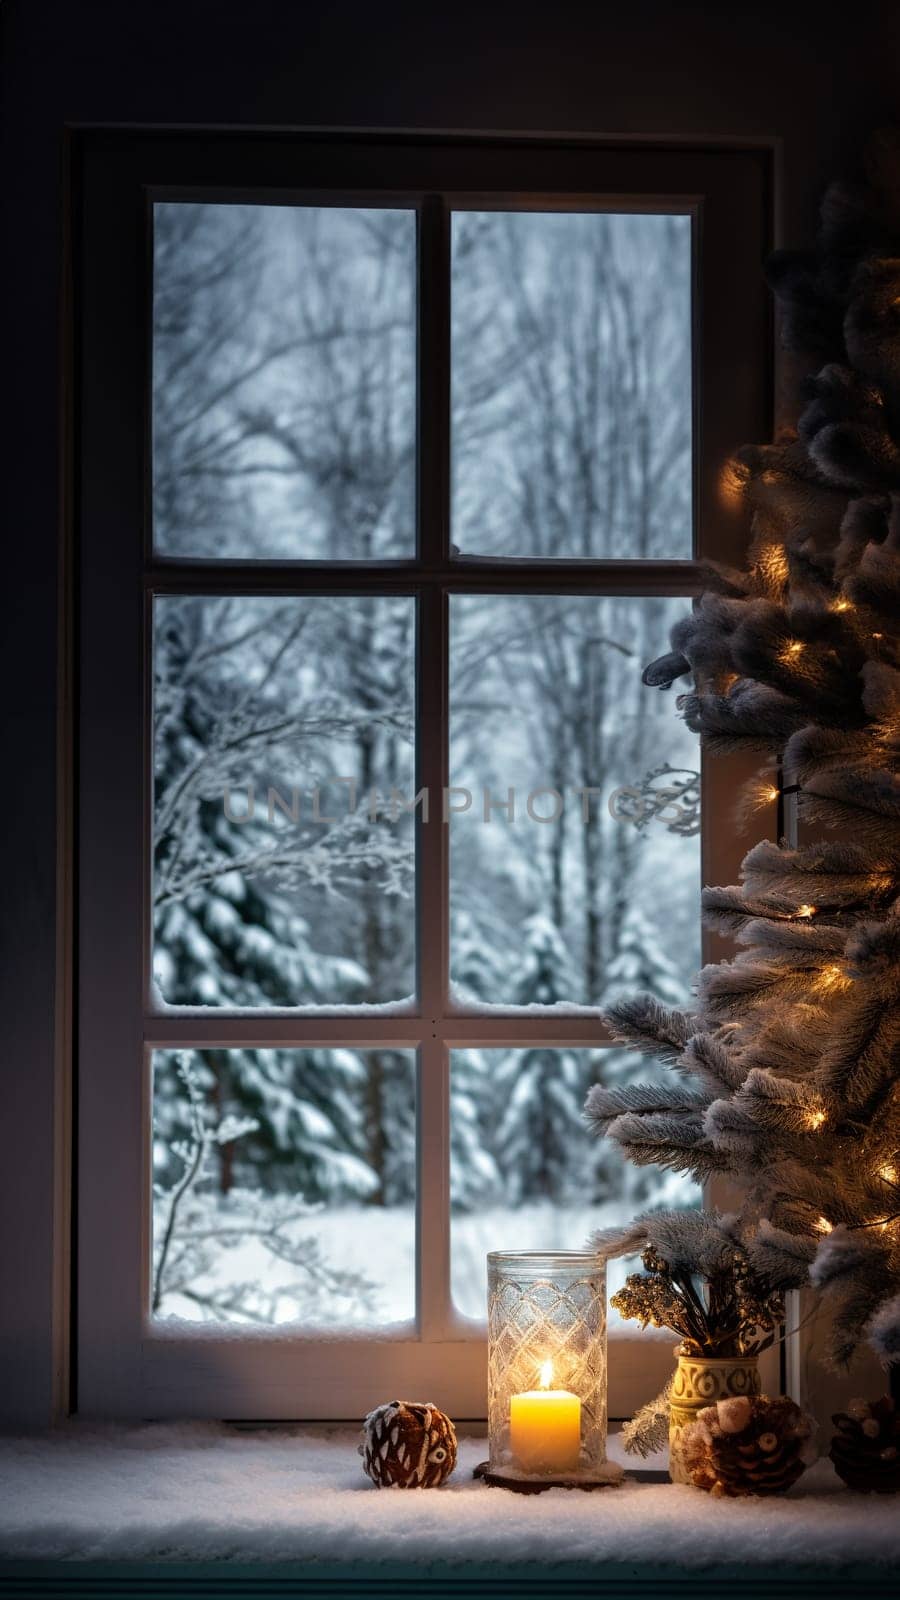 Cottage View into Snowy Forest by Ciorba